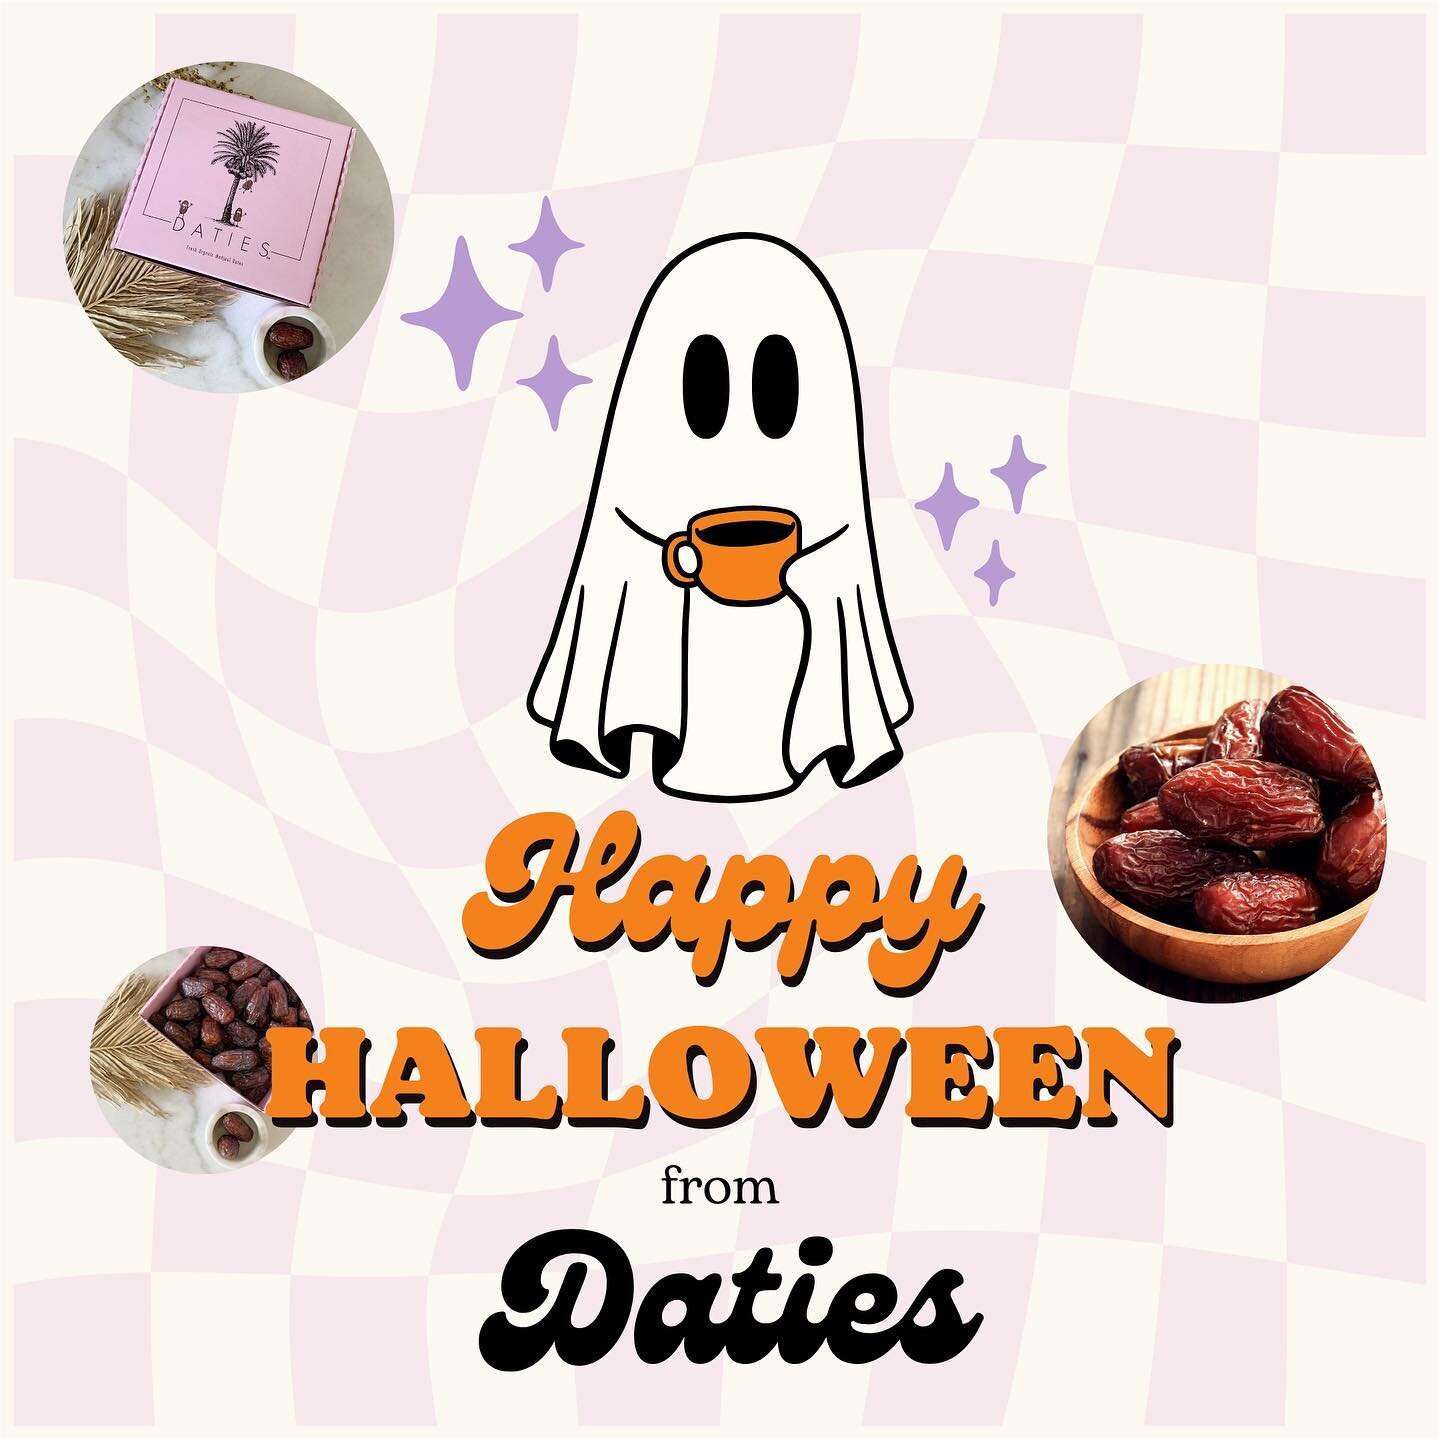 Dates don&rsquo;t have to be scary this Halloween!

#dates #halloween #organic
#treat